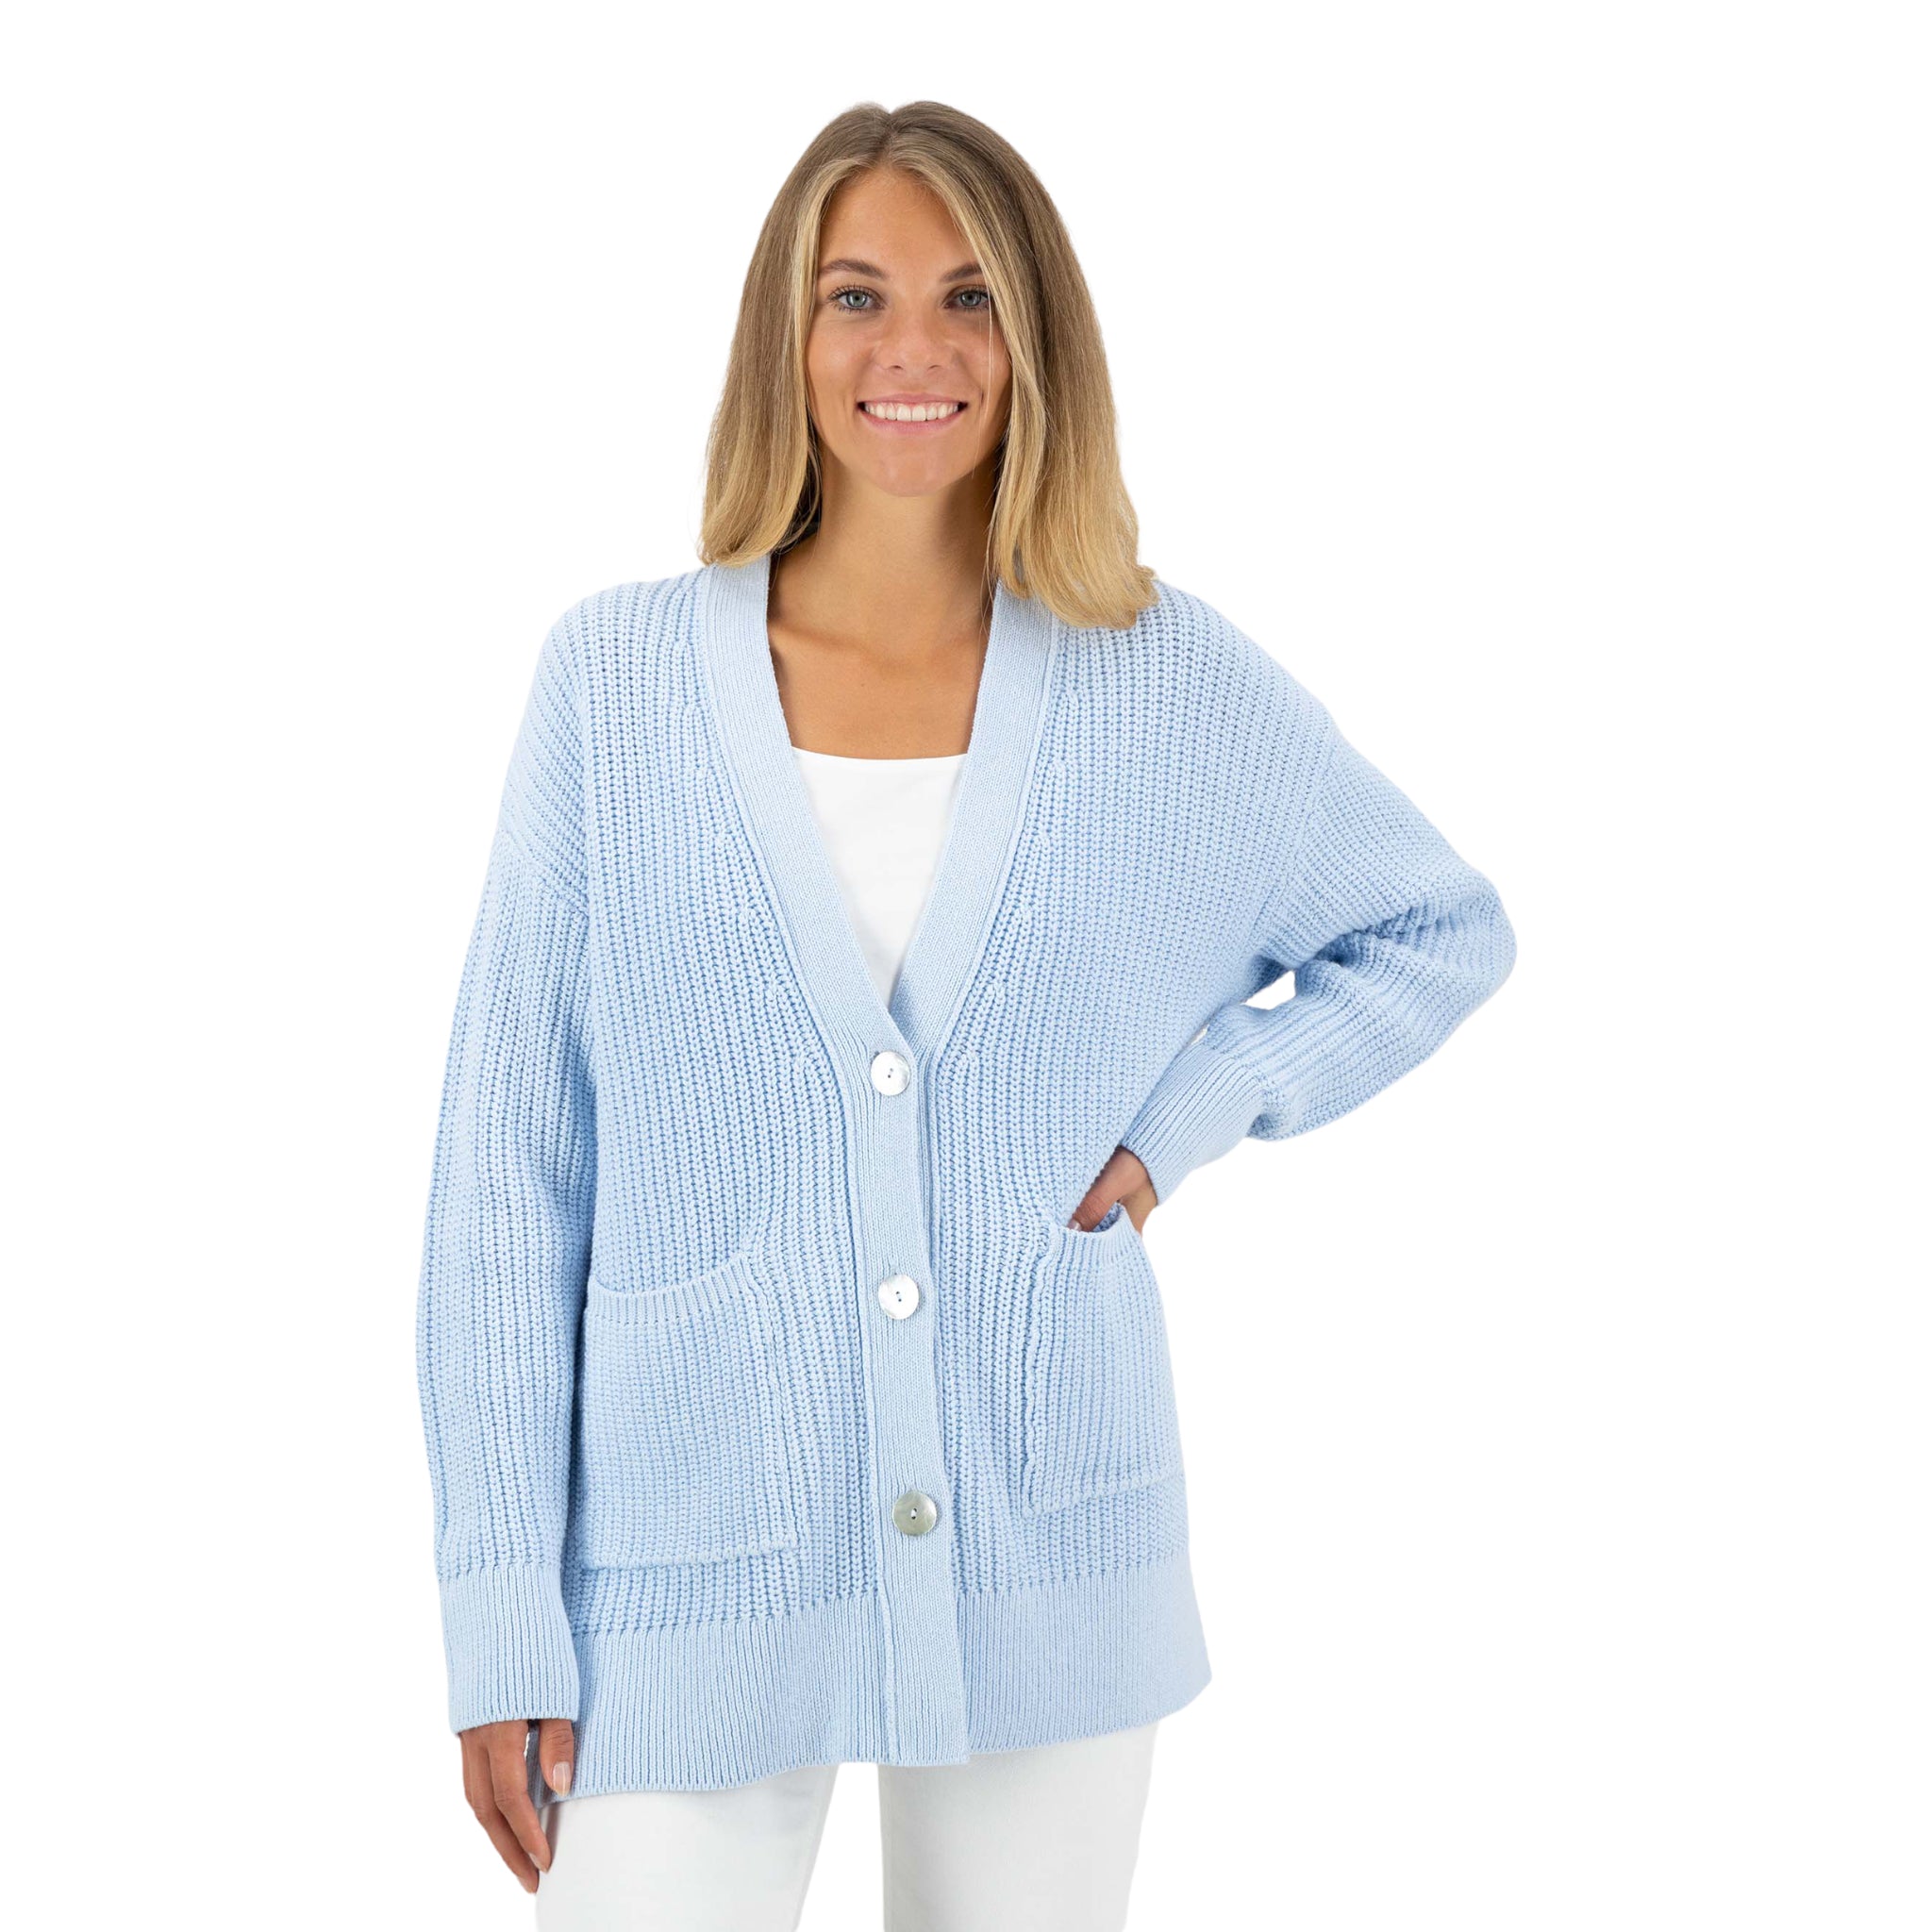 Just White You Long Cardigan Light Blue